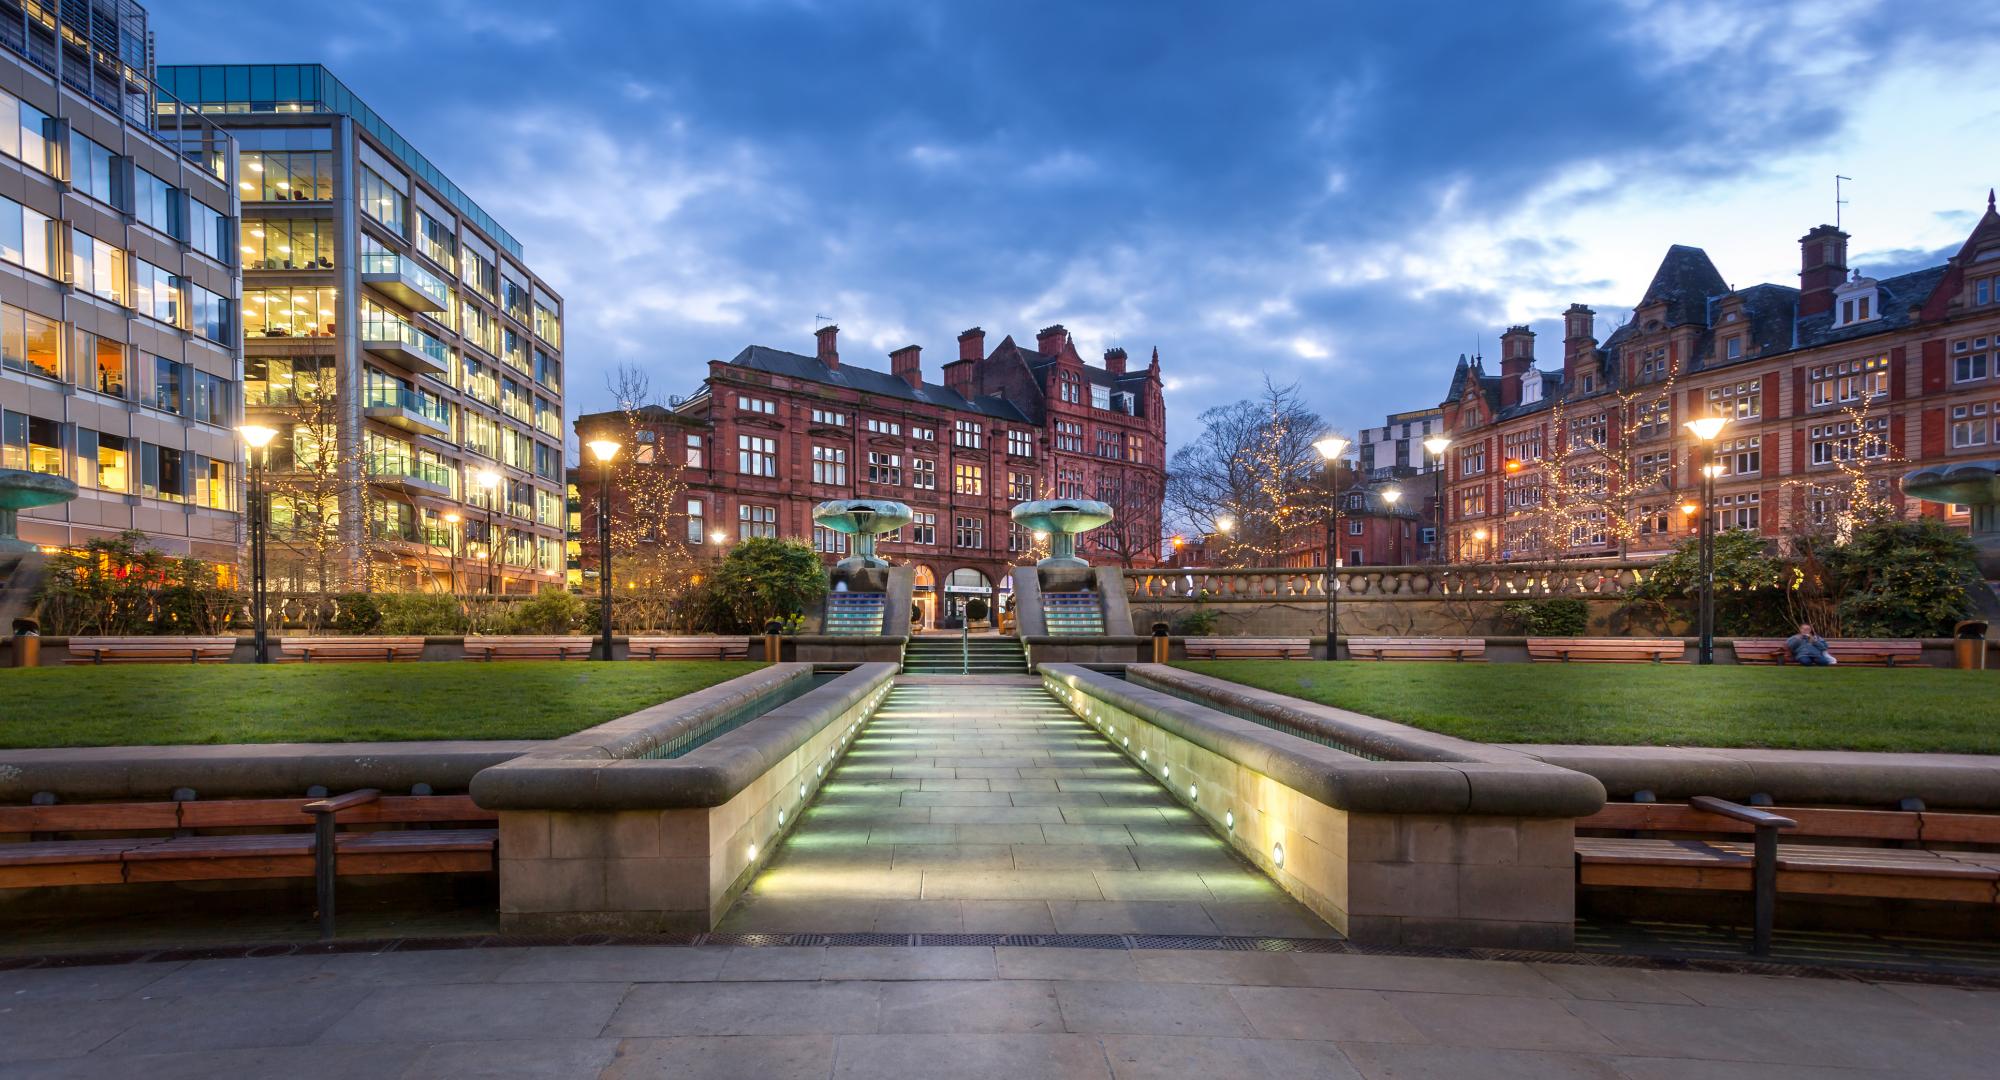 Peace Gardens in the city centre of Sheffield , England.